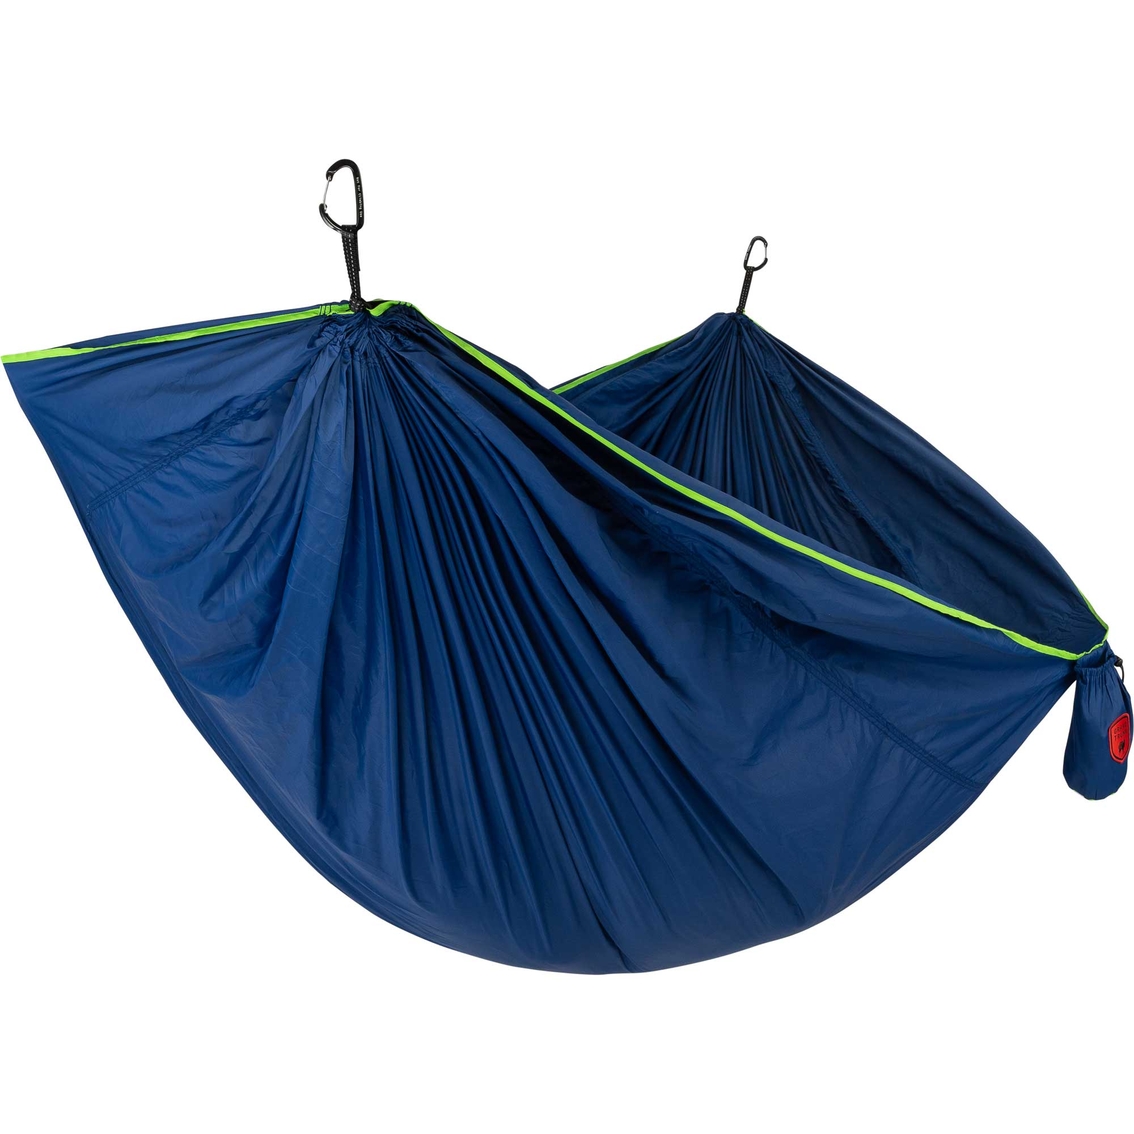 Grand Trunk TrunkTech Double Hammock - Image 1 of 7